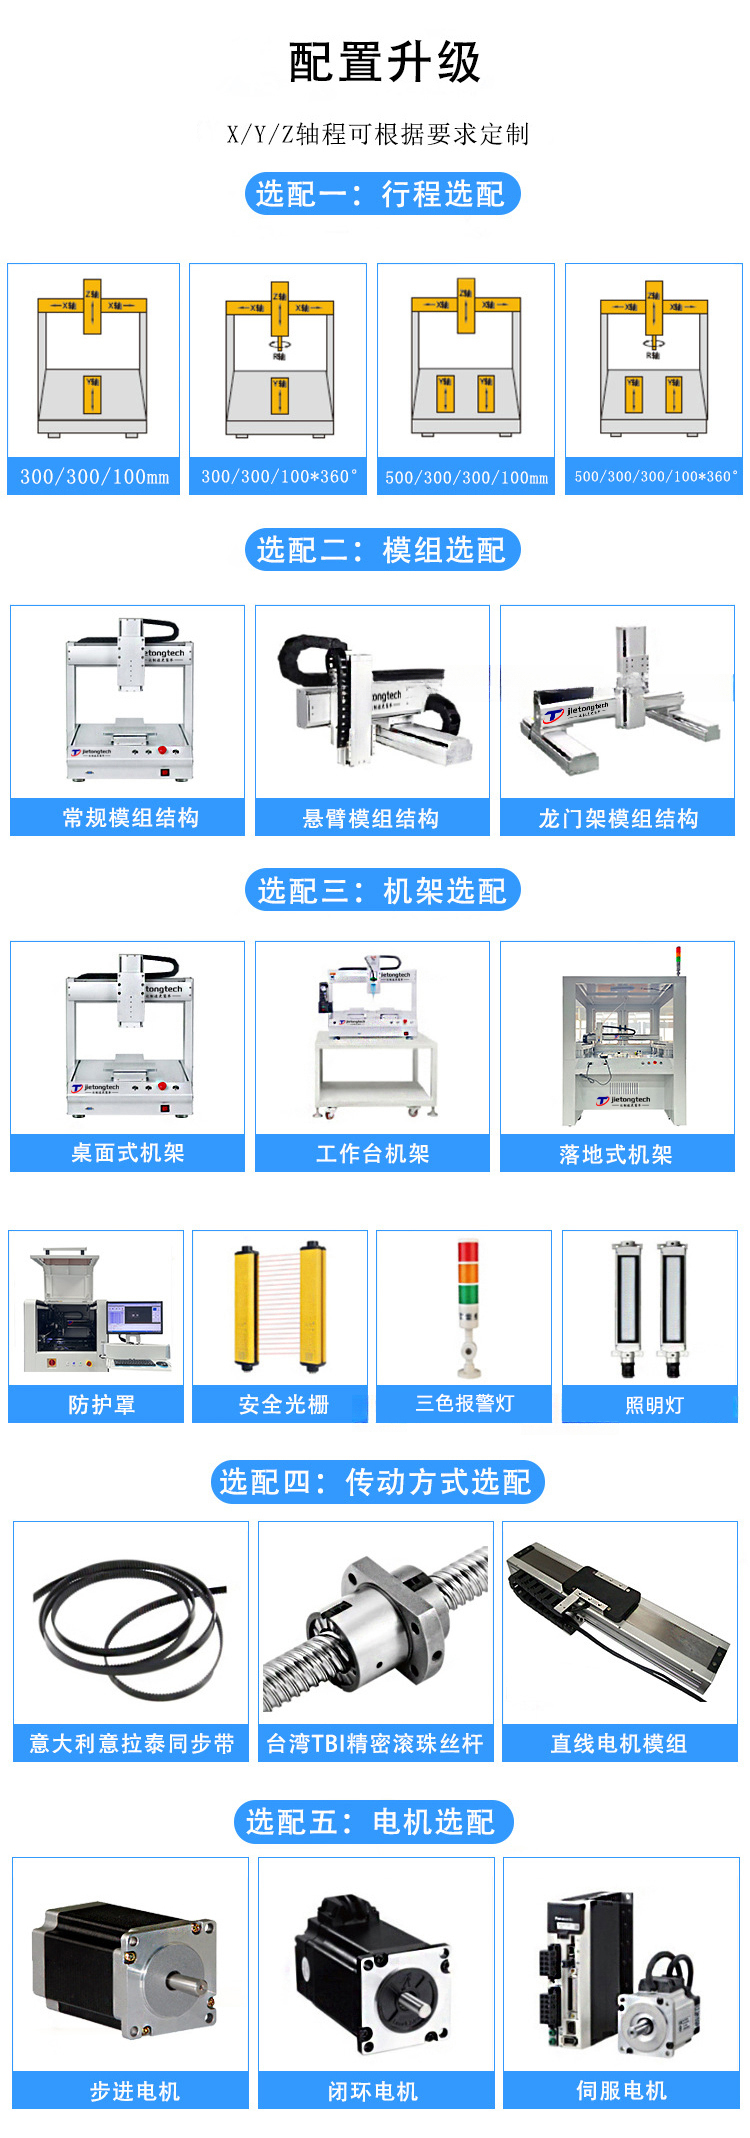 Android wire soldering robot Apple USB fully automatic soldering machine equipment Data cable automatic soldering machine